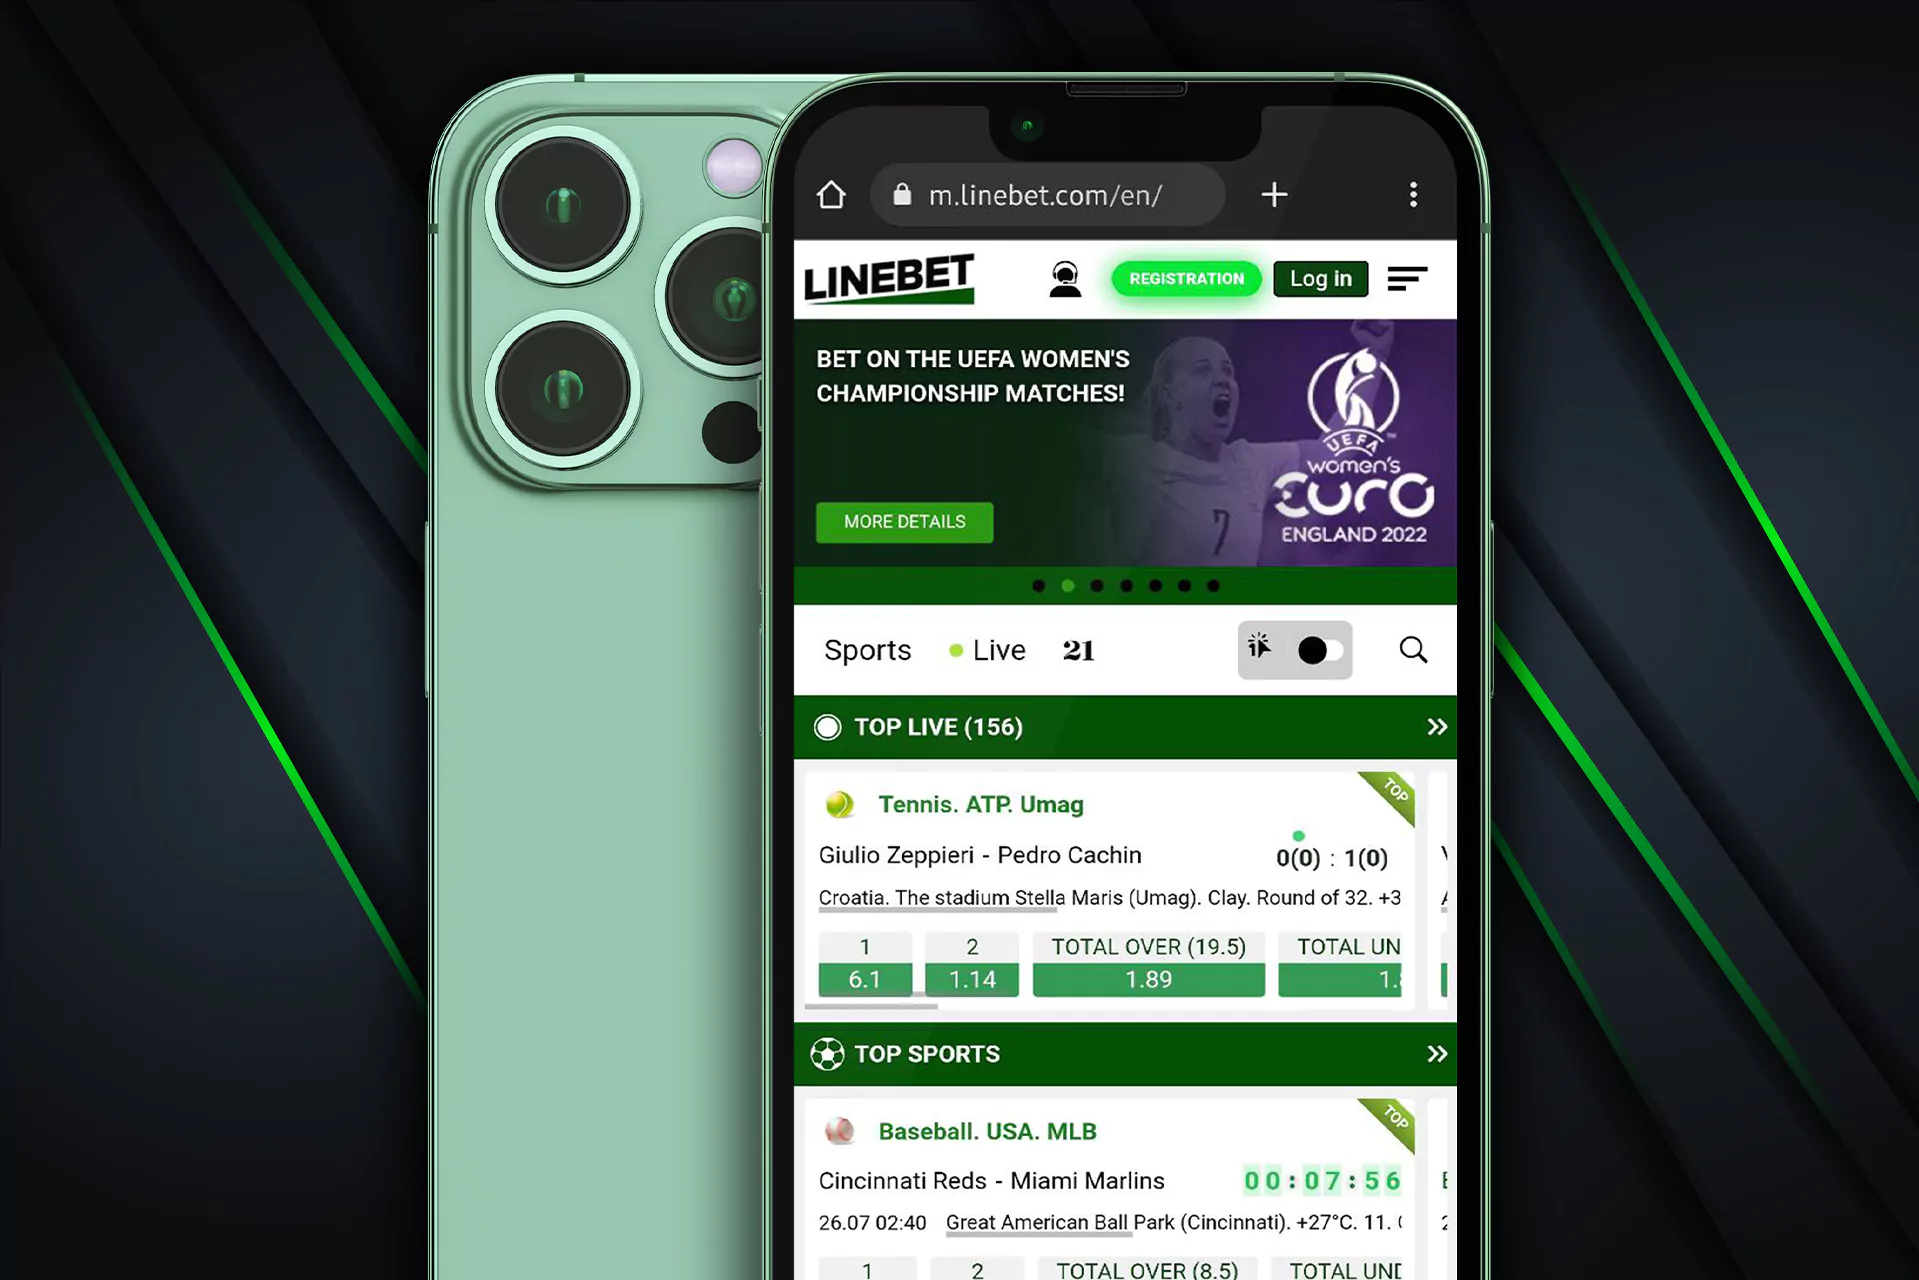 There is a website mobile version of Linebet for those who do not want to download the soft.